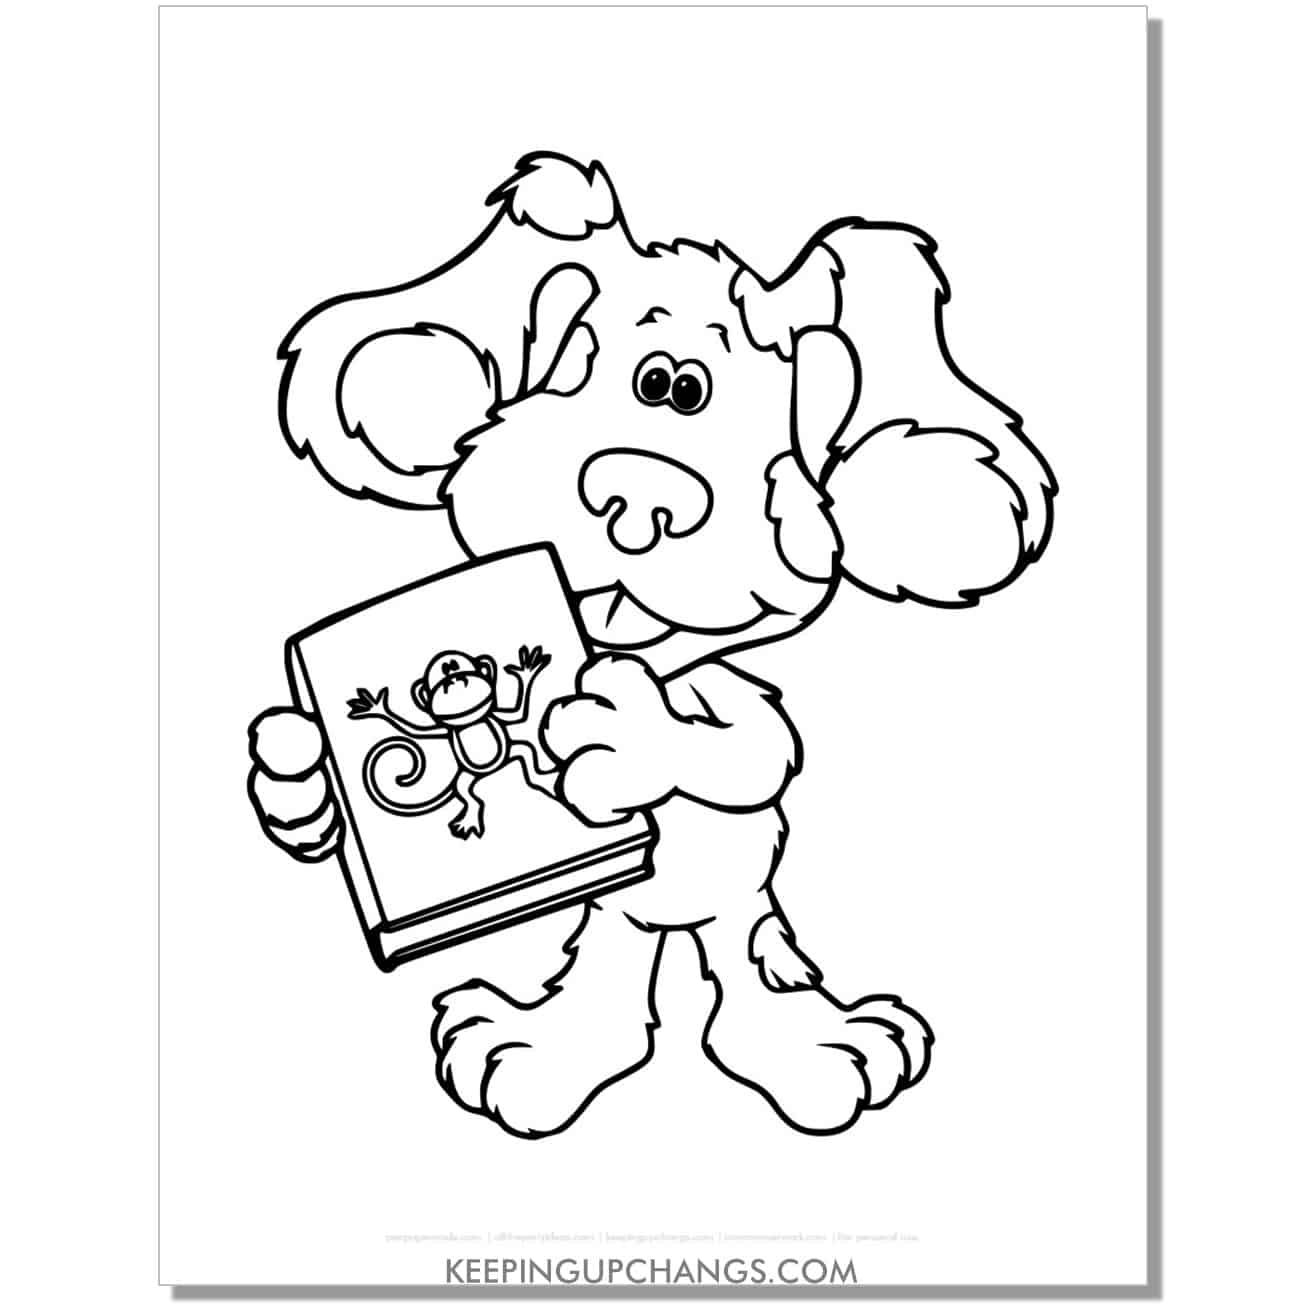 free monkey book blue's clues coloring page, sheet.